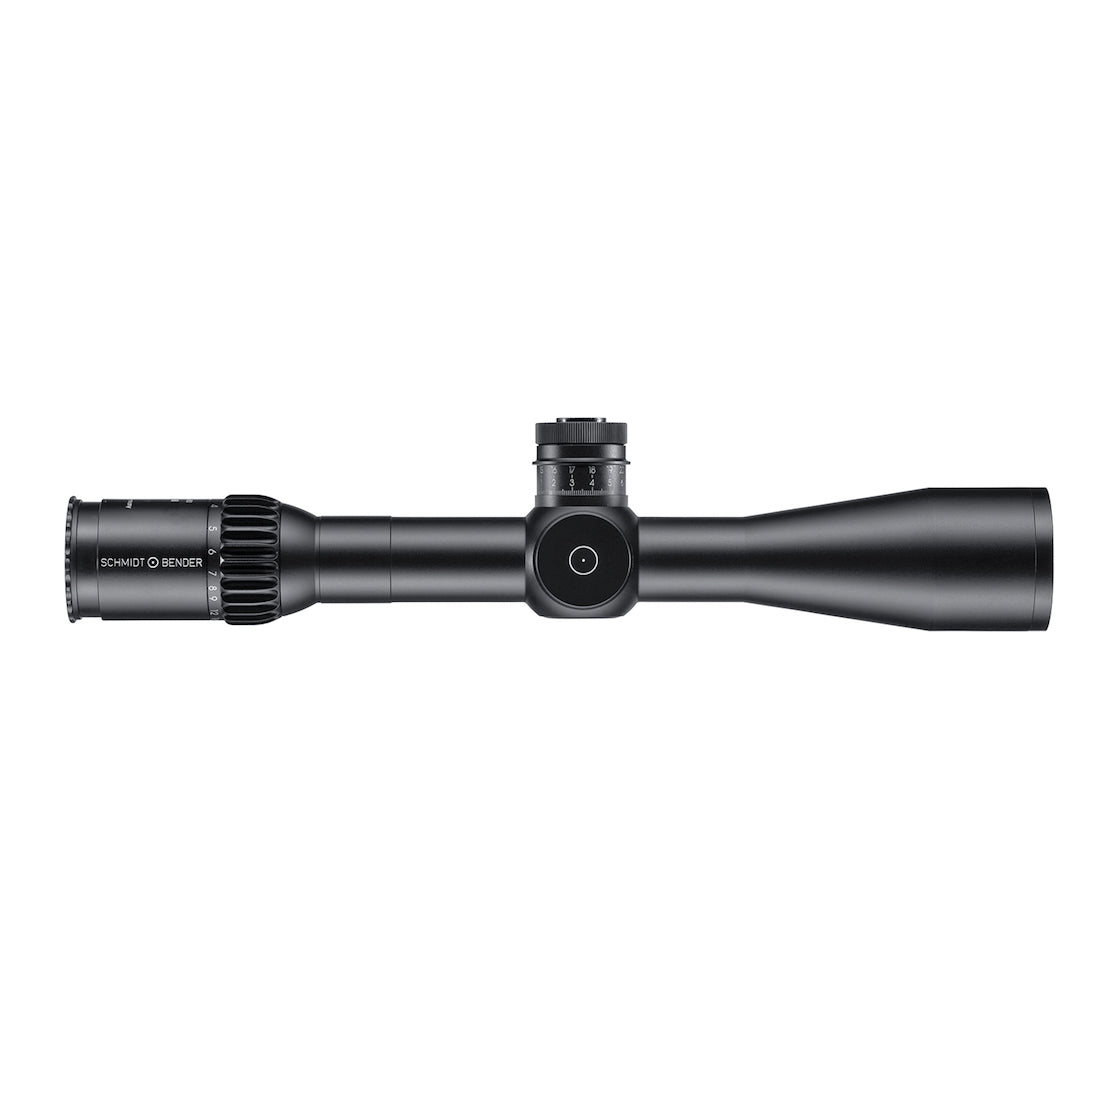 Schmidt & Bender PMII 3-20x50 Rifle Scope  | Cluny Country 